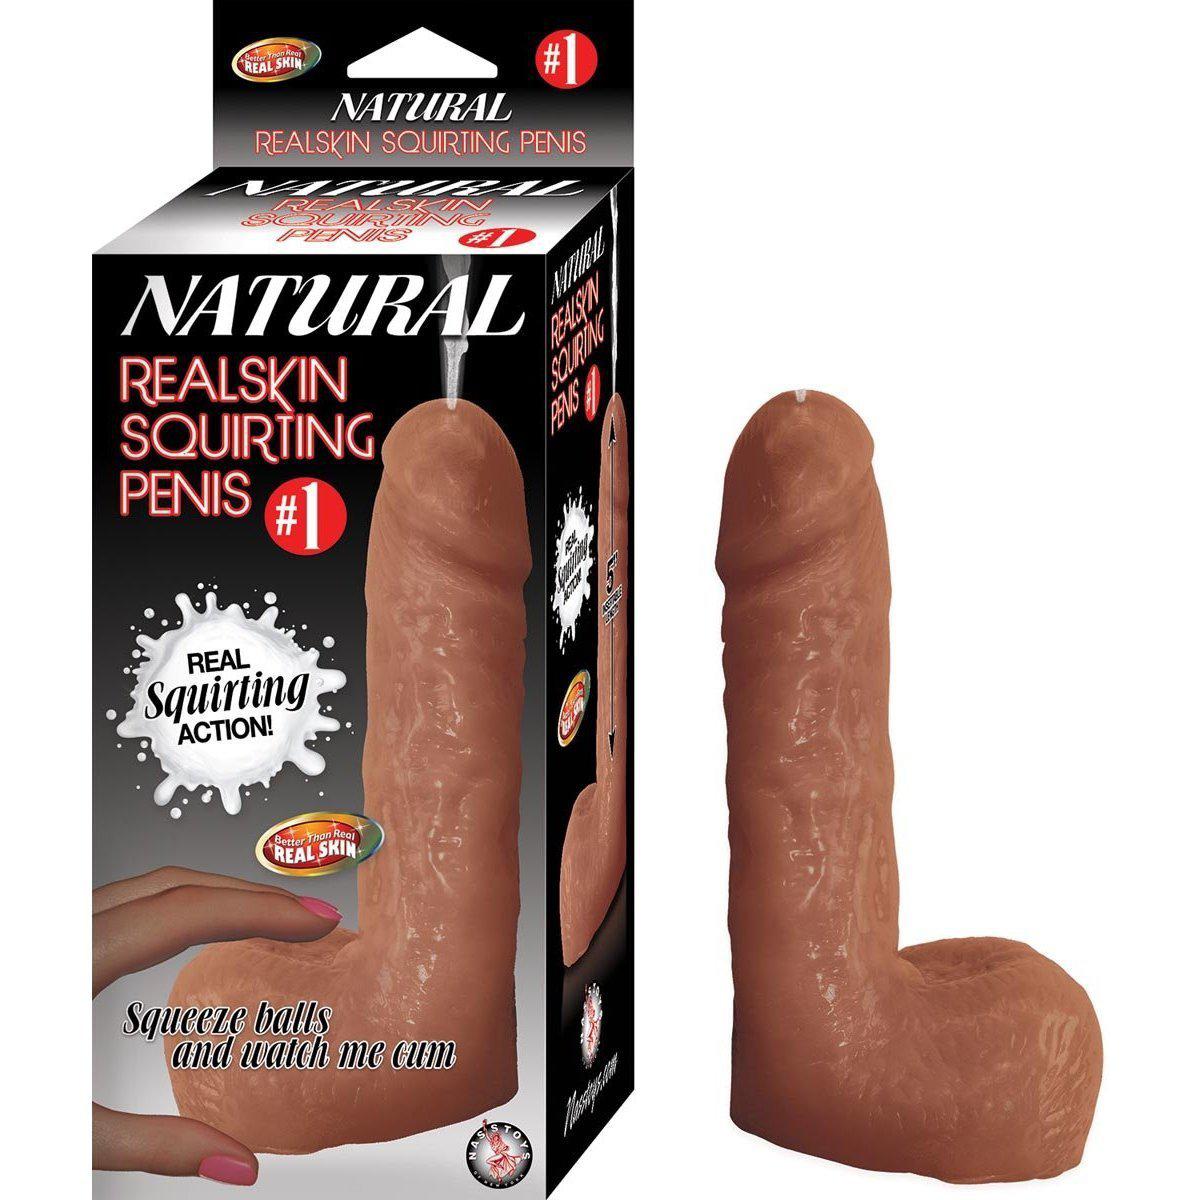 Natural Realskin Squirting Penis